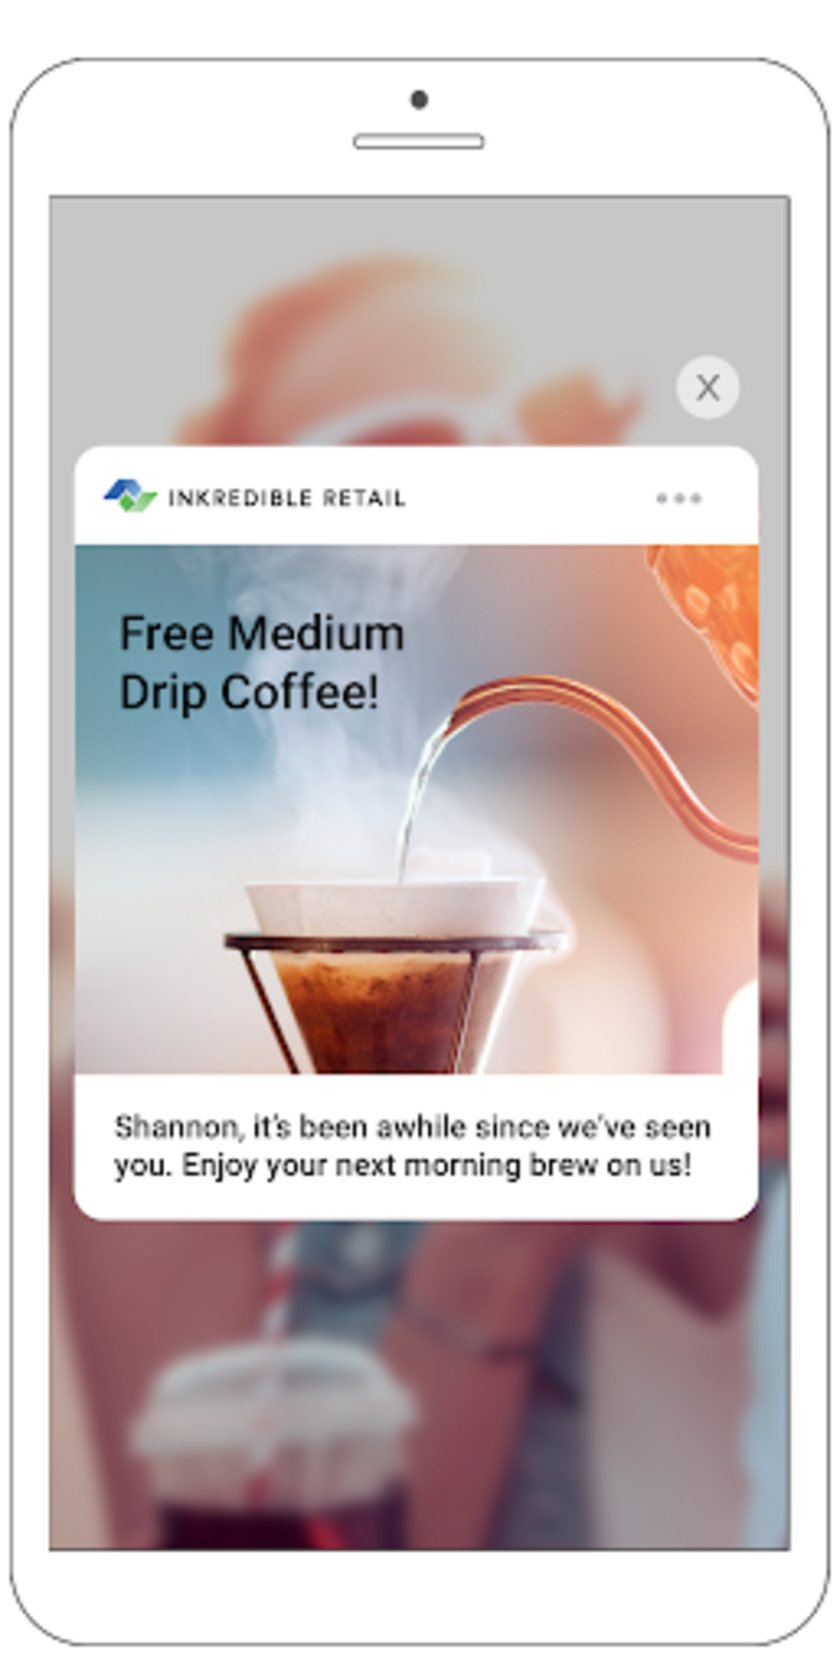 Tiime-targeted push notification from Inkredible Retail